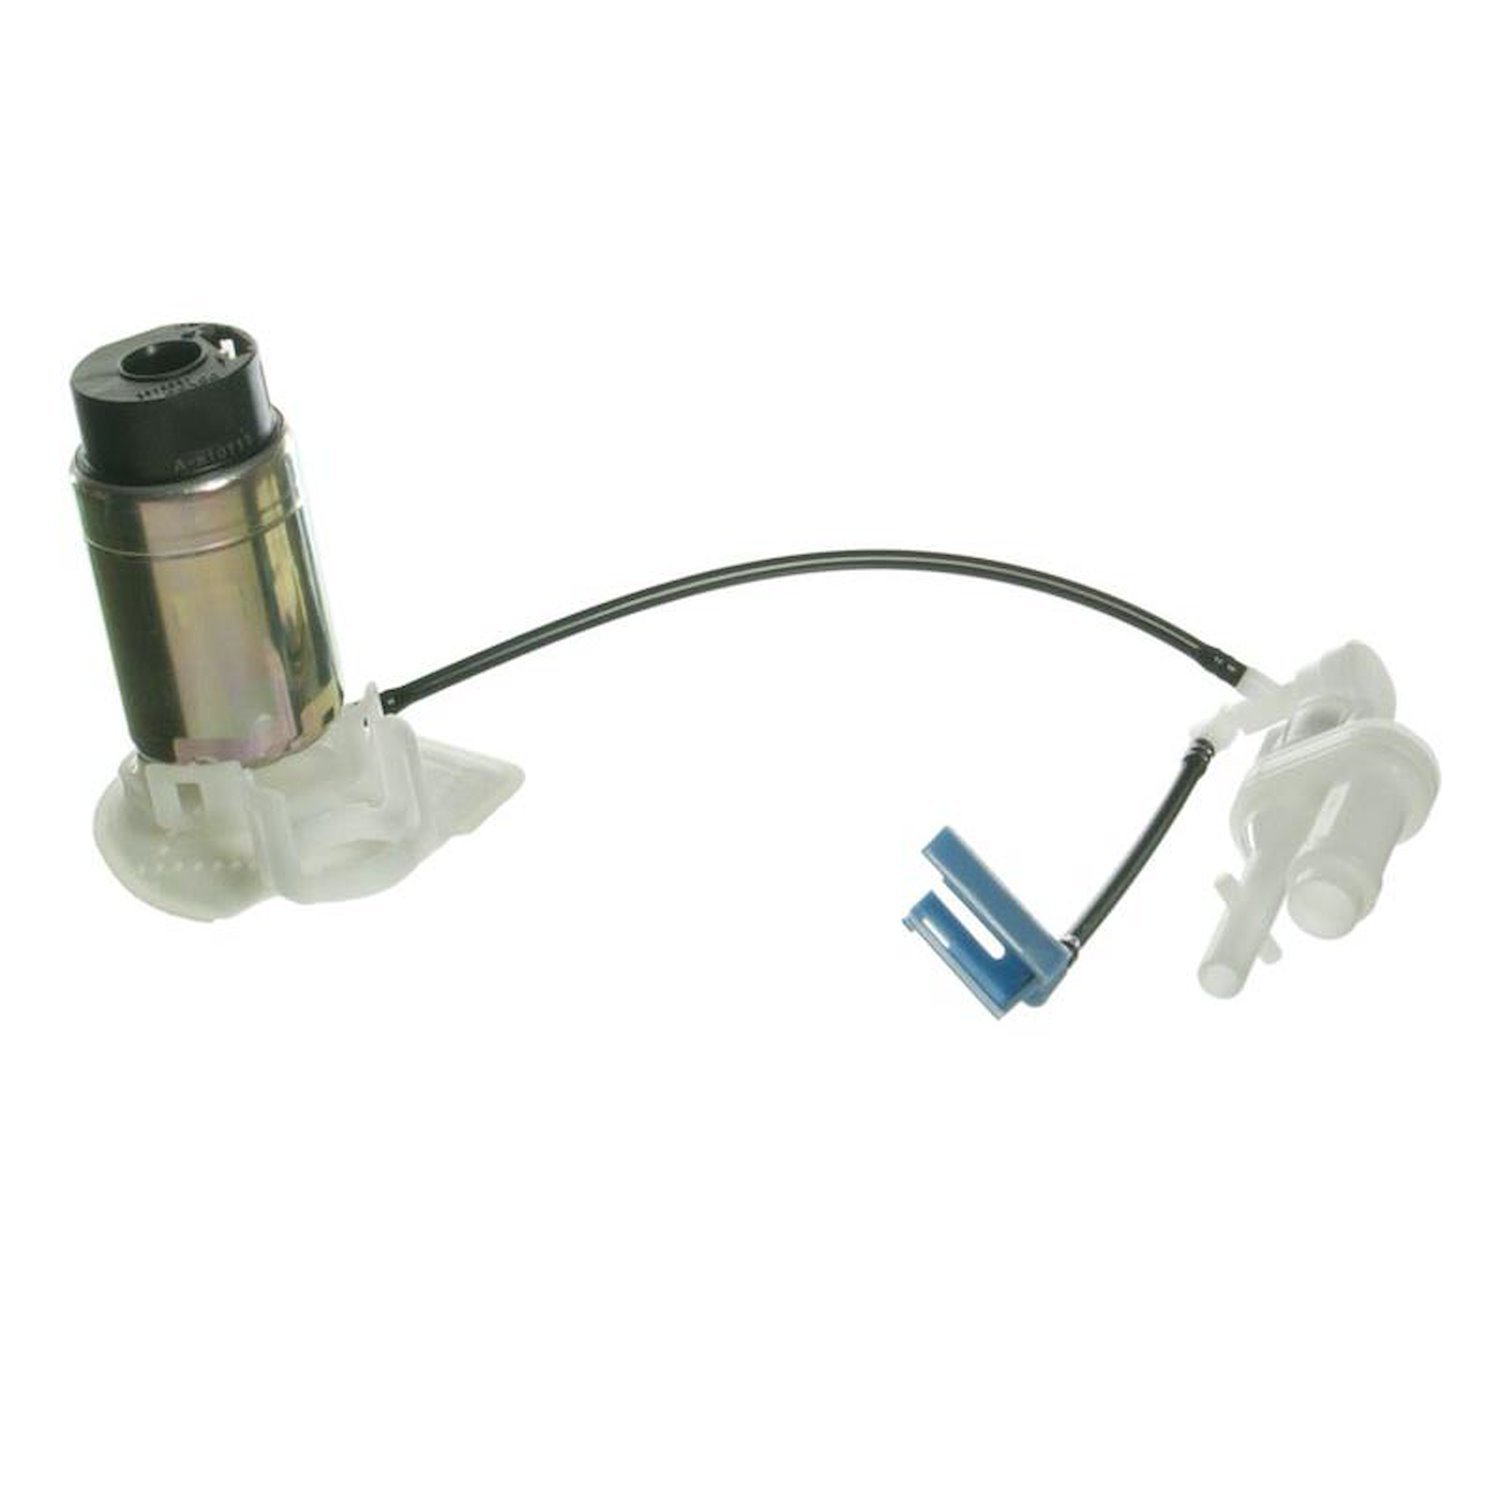 OE Replacement Fuel Pump and Strainer Set for